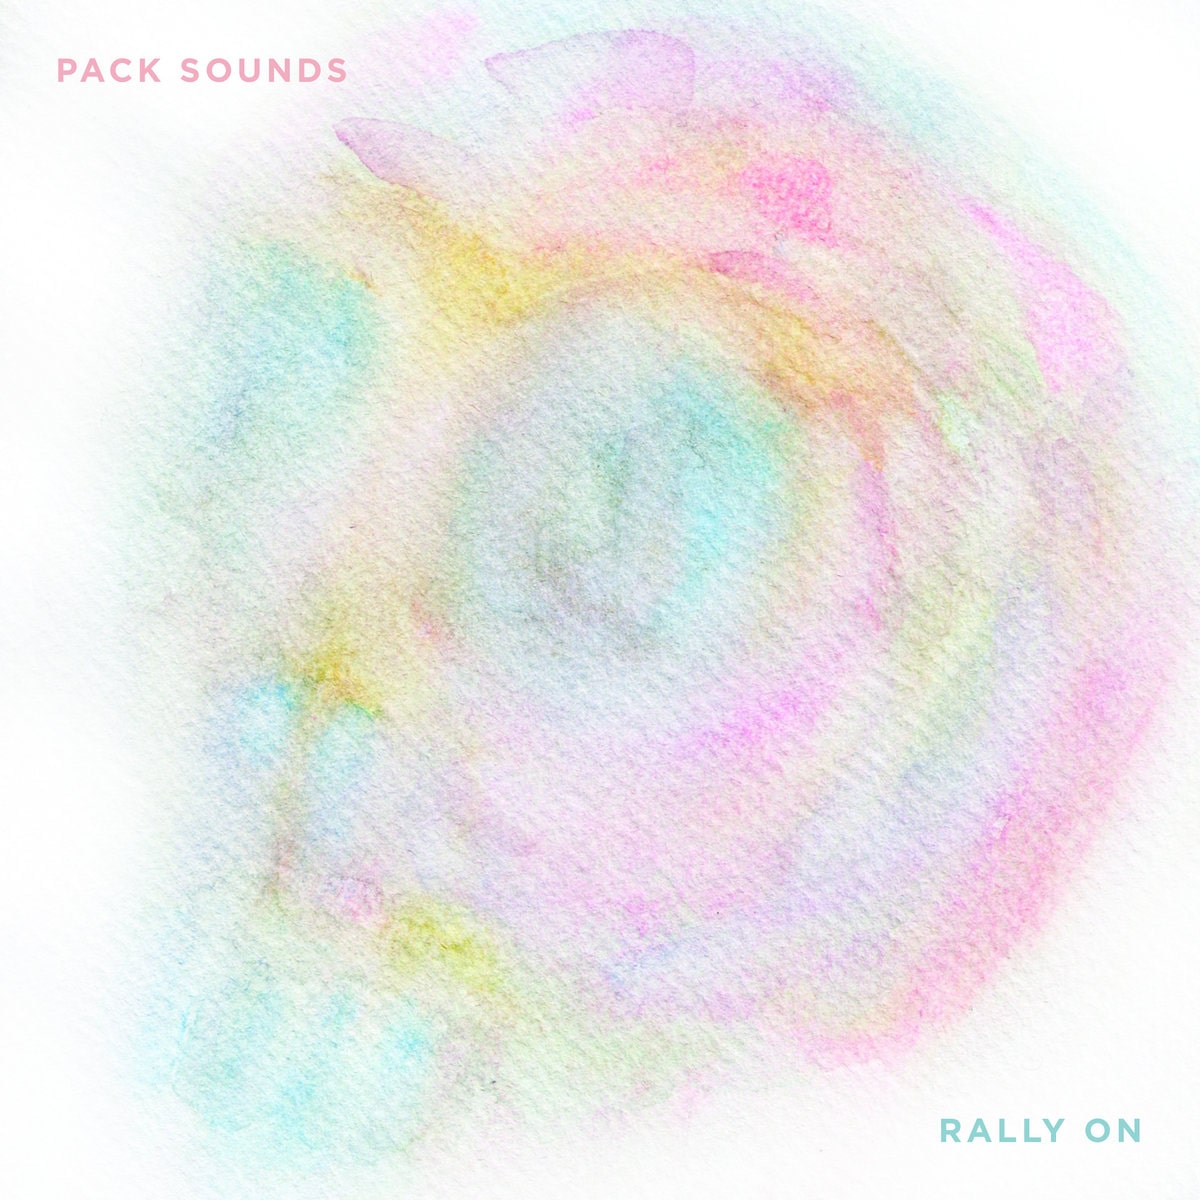 PACK SOUNDS cover by Jon Weed of Cassilis,